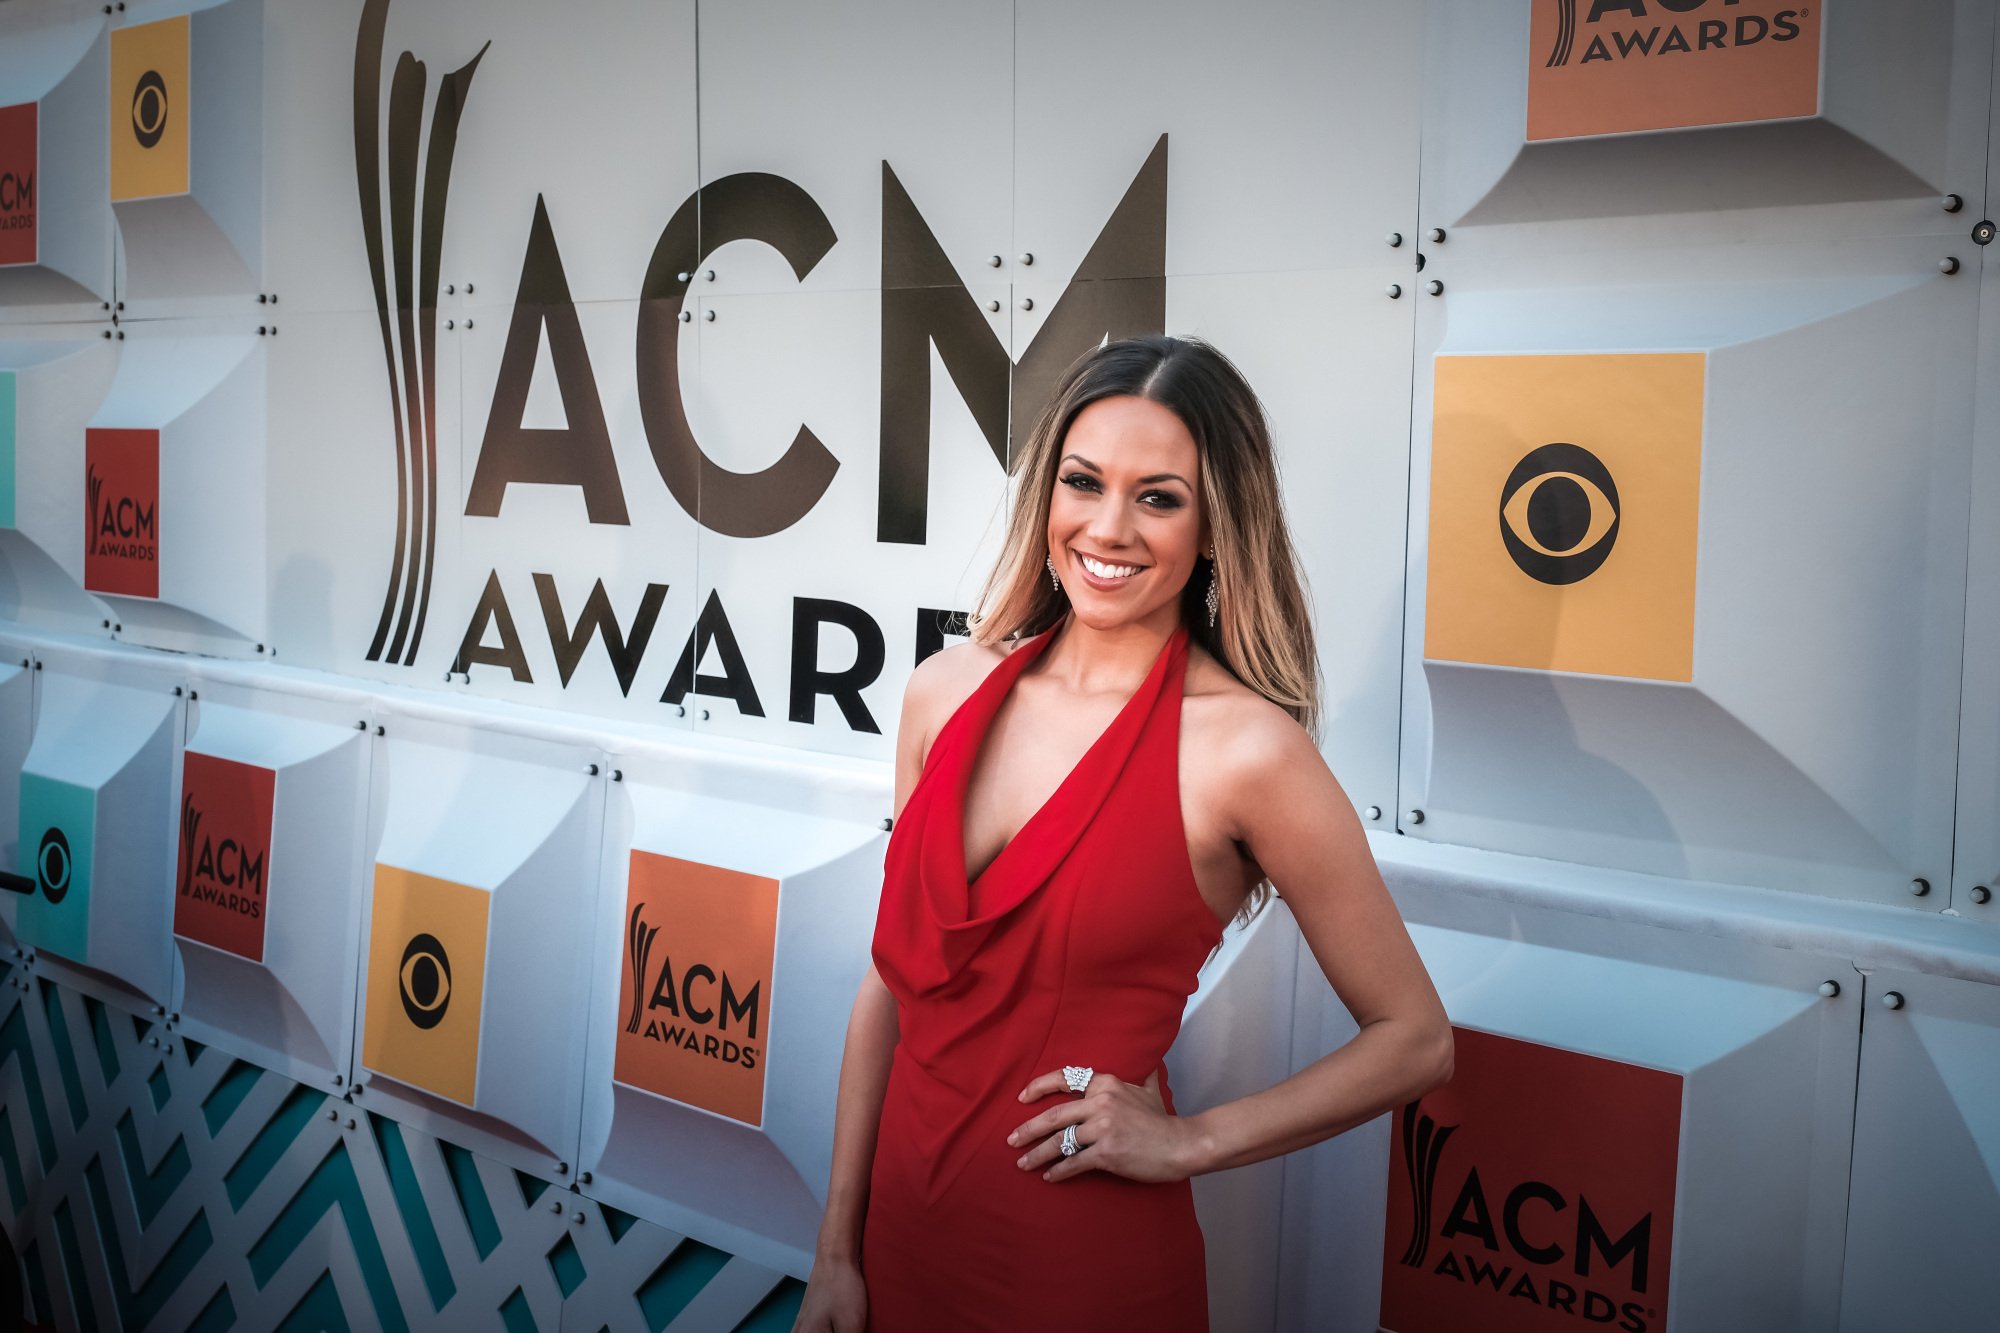 Possible Real Housewives of Nashville star Jana Kramer at the ACADEMY OF COUNTRY MUSIC AWARDS, co-hosted by Luke Bryan and Dierks Bentley from the MGM Grand Garden Arena in Las Vegas, Sunday, April 3, 2016